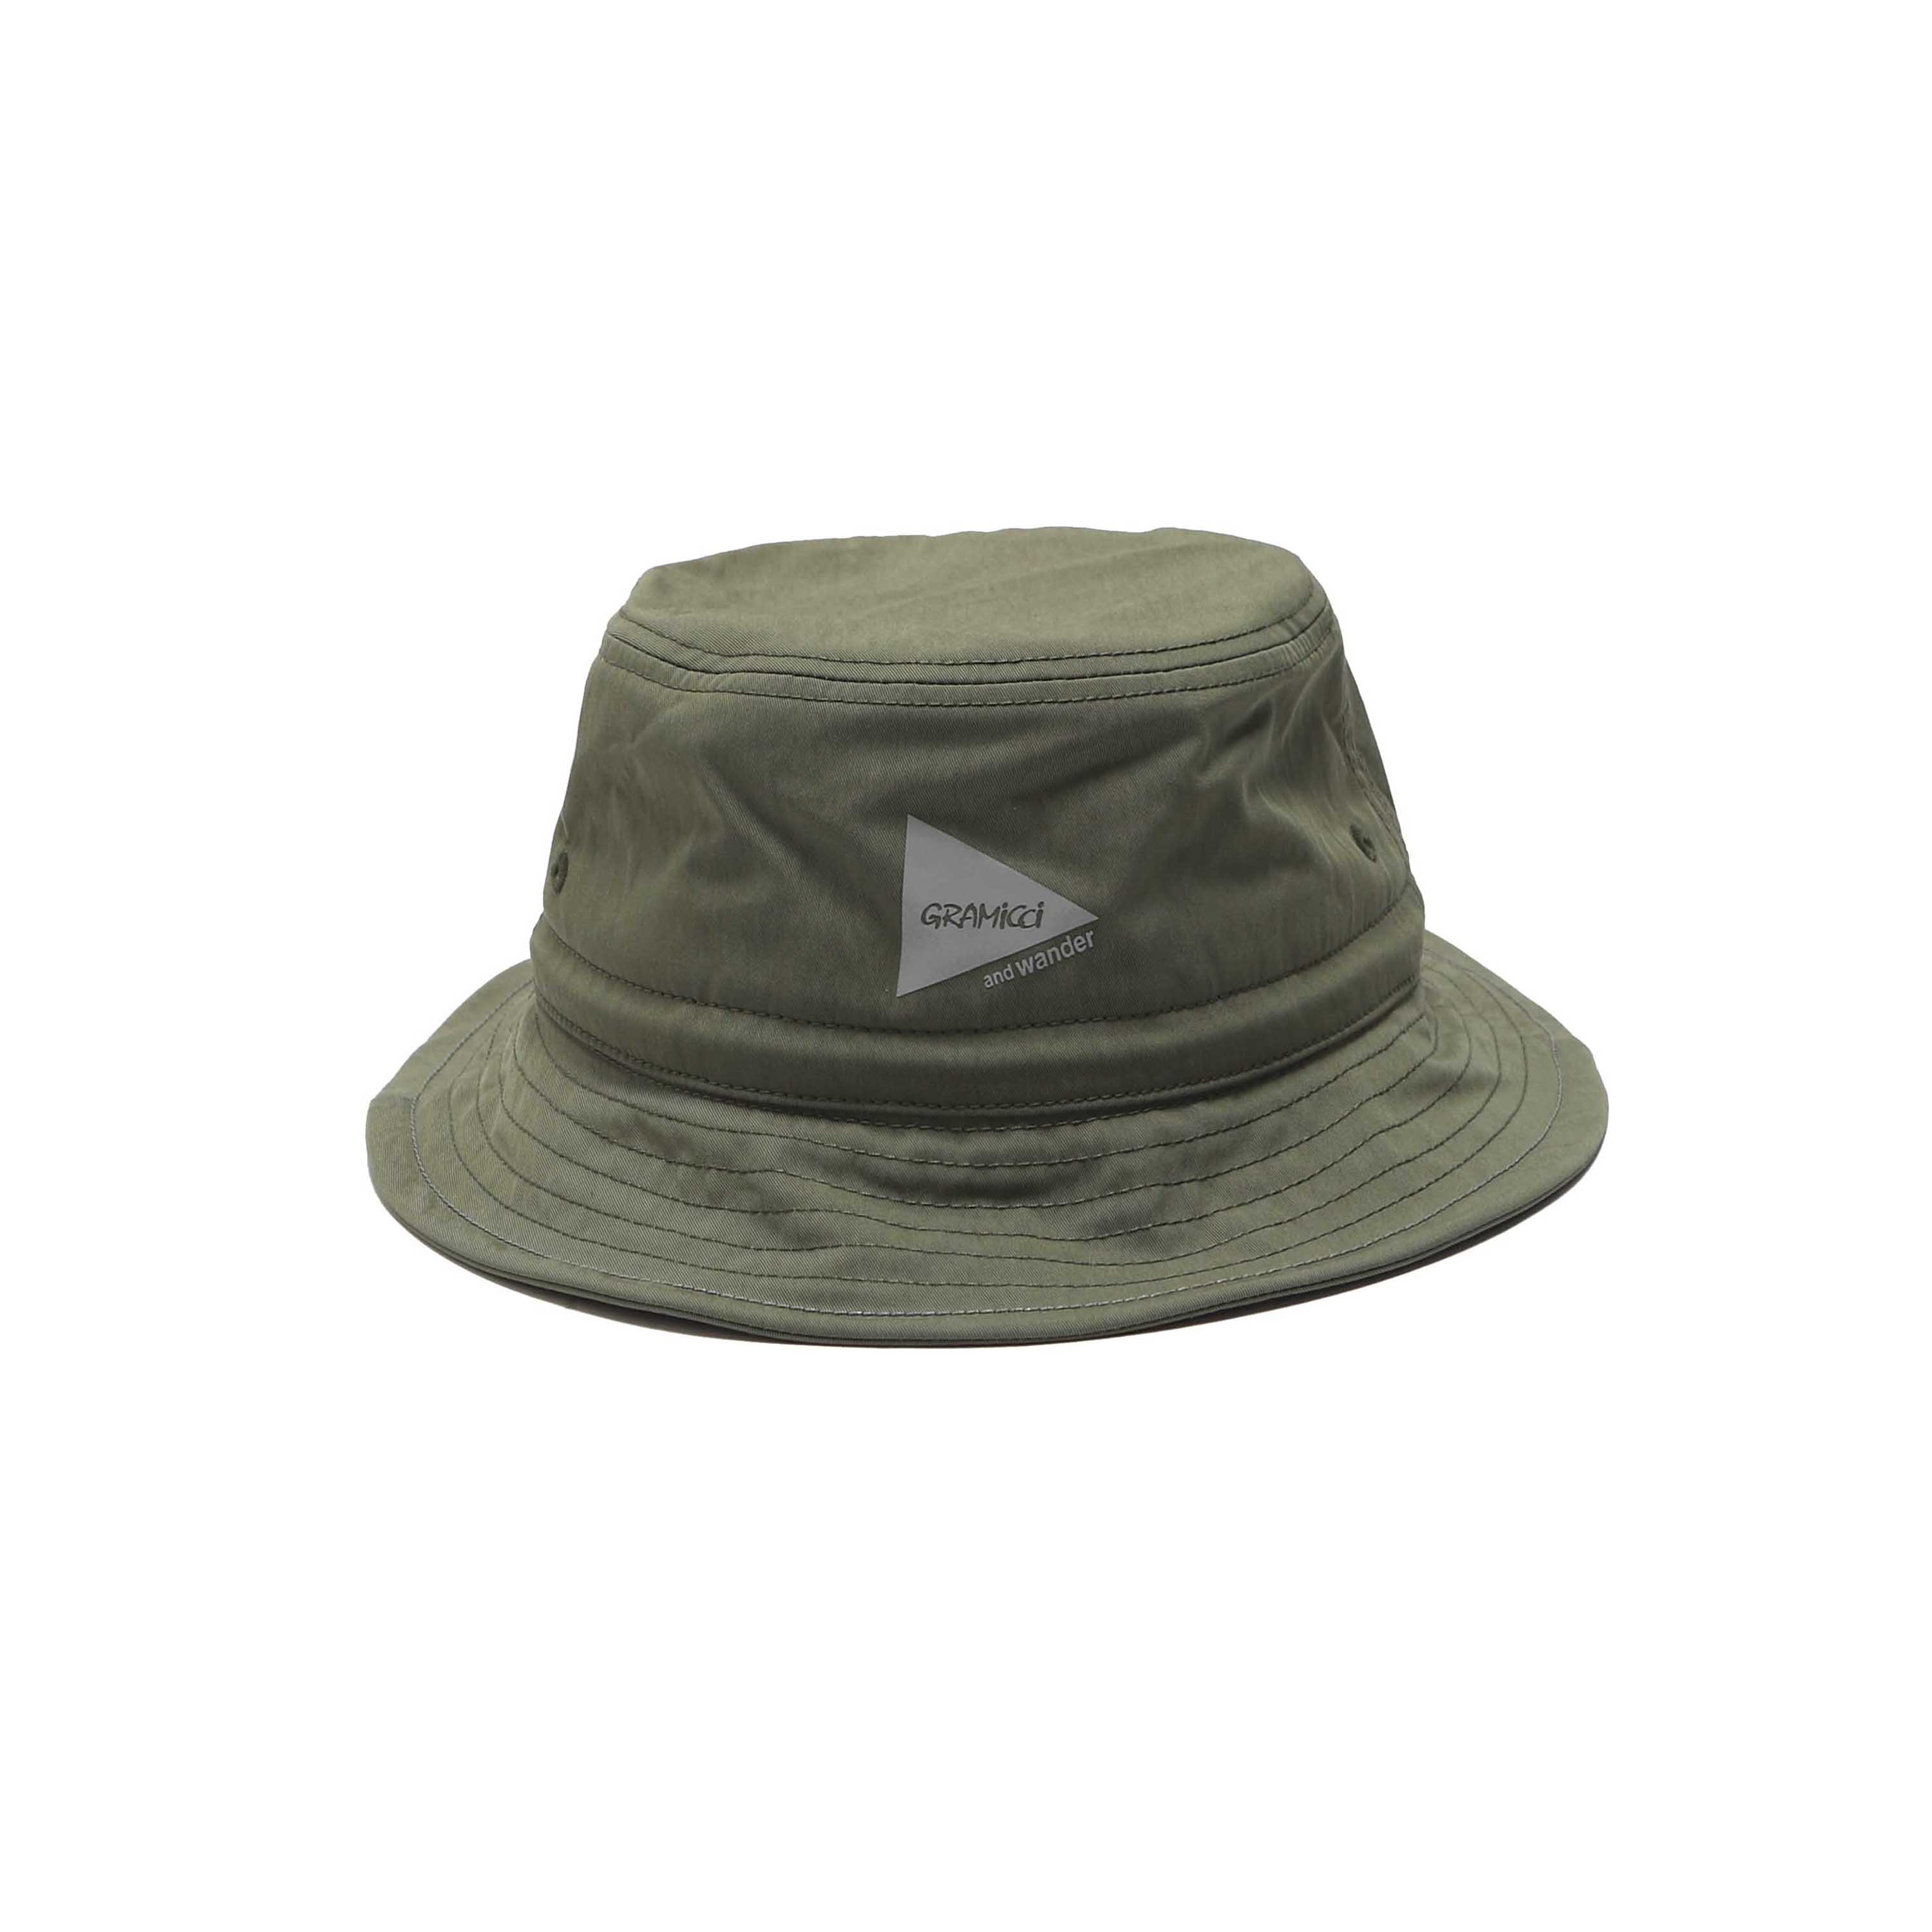 X GRAMICCI NYCO HAT - OLIVE